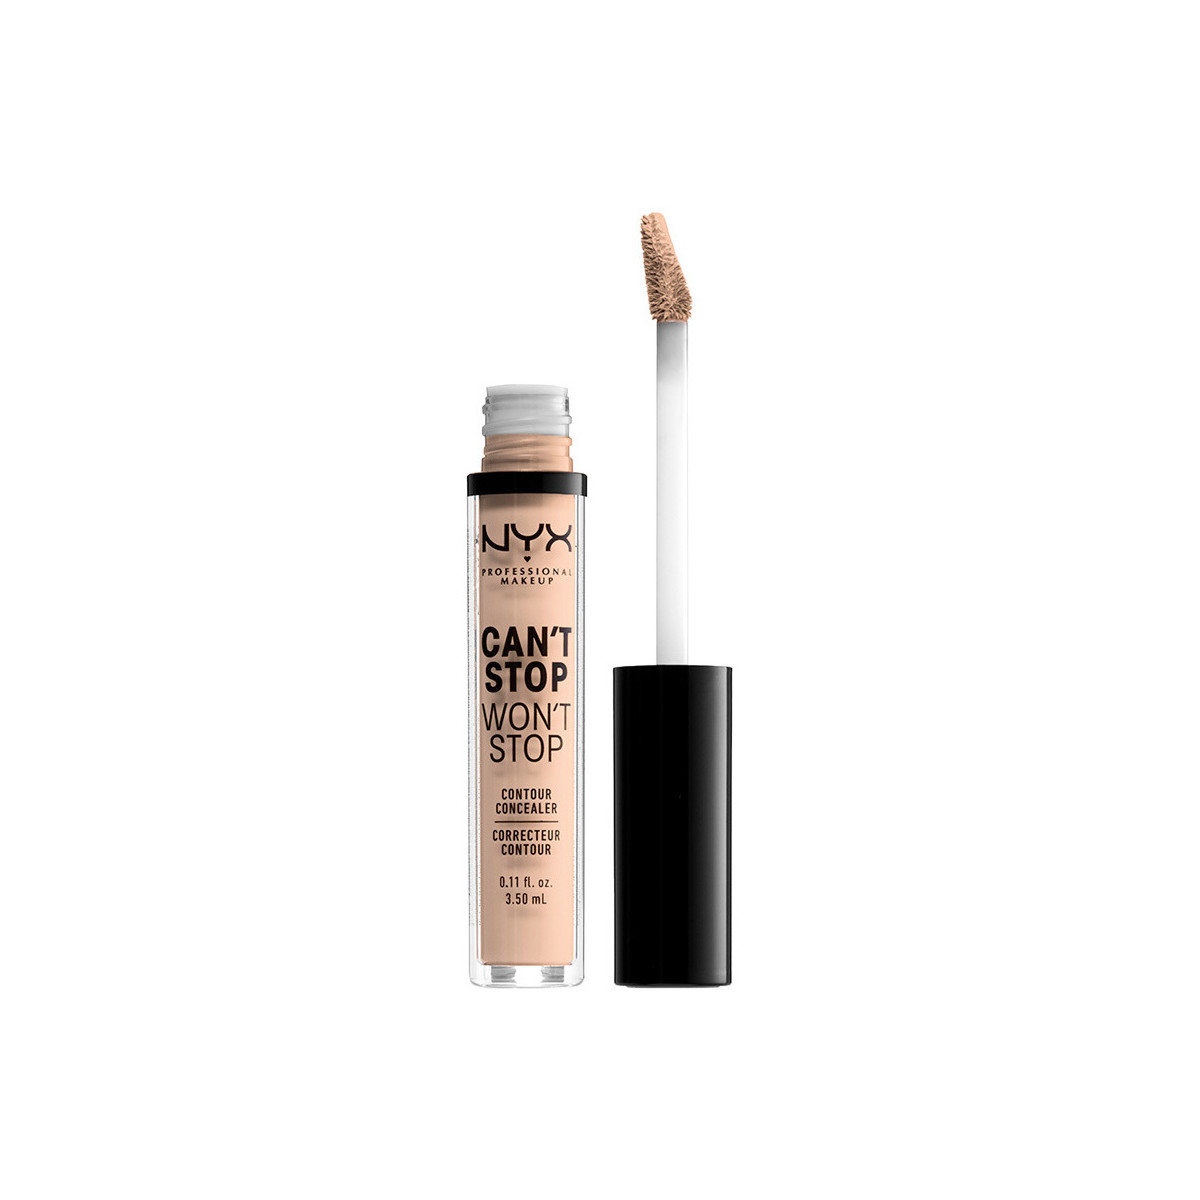 Beauty Make-up & Foundation  Nyx Professional Make Up Can't Stop Won't Stop Contour Concealer alabaster 